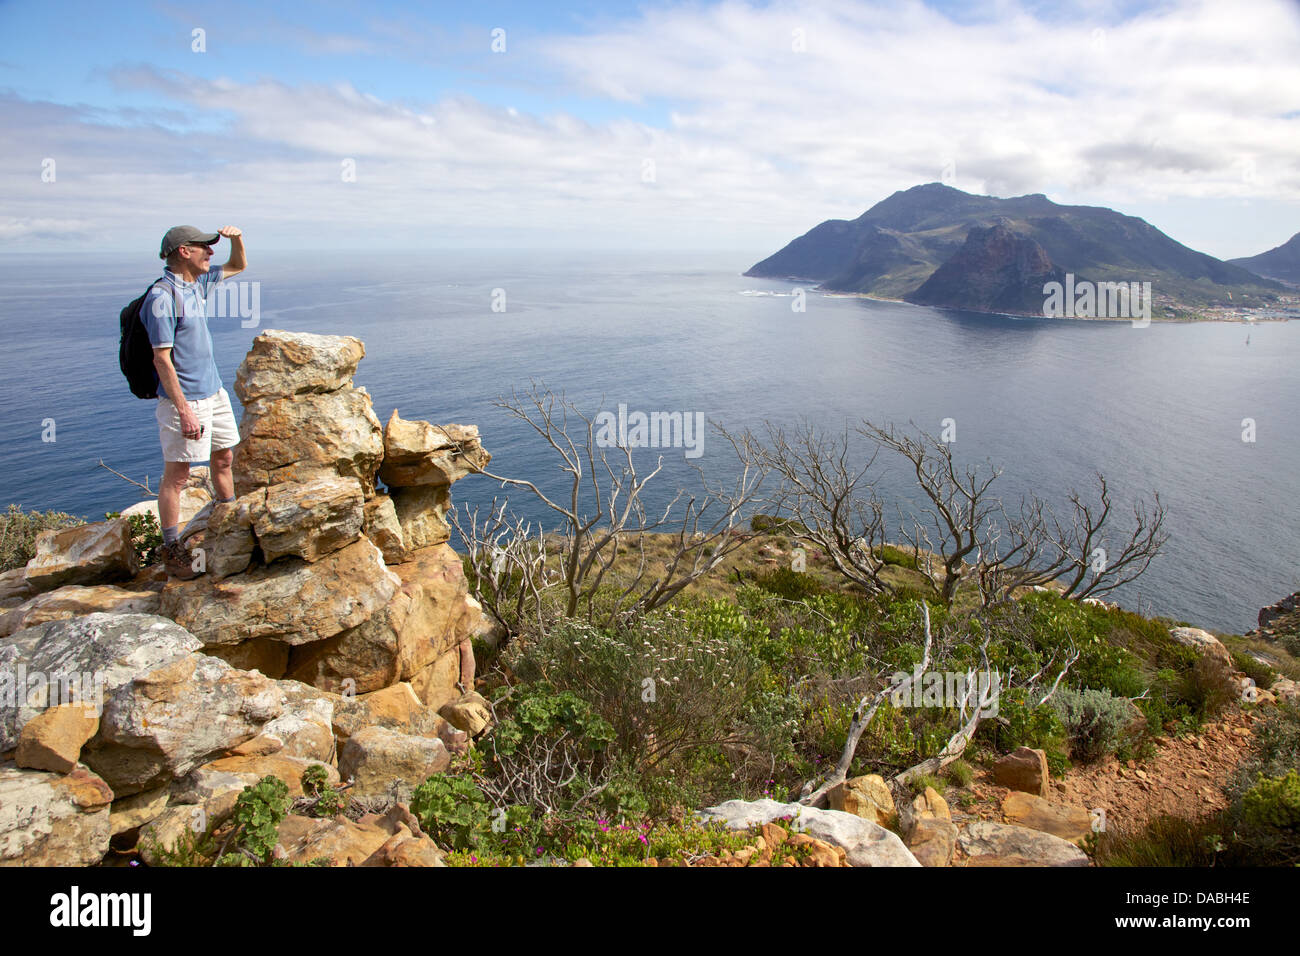 A hiker pauses along the Chapman's Peak section of the Hoerikwaggo Trail, in Table Mountain National Park, South Africa. Stock Photo